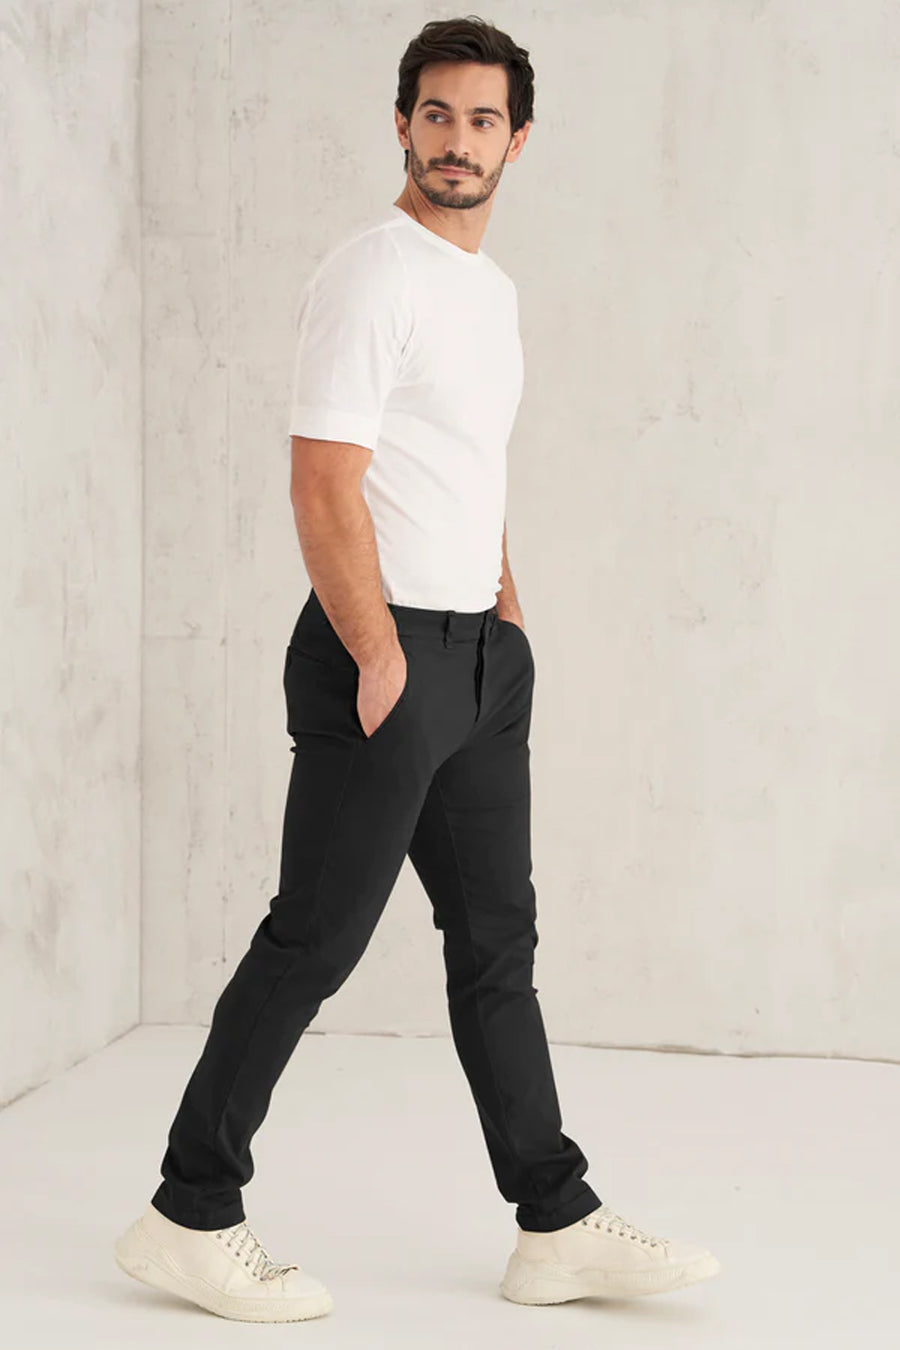 Buy the Transit Stretch Italian Cotton Chino Trousers in Black at Intro. Spend £50 for free UK delivery. Official stockists. We ship worldwide.